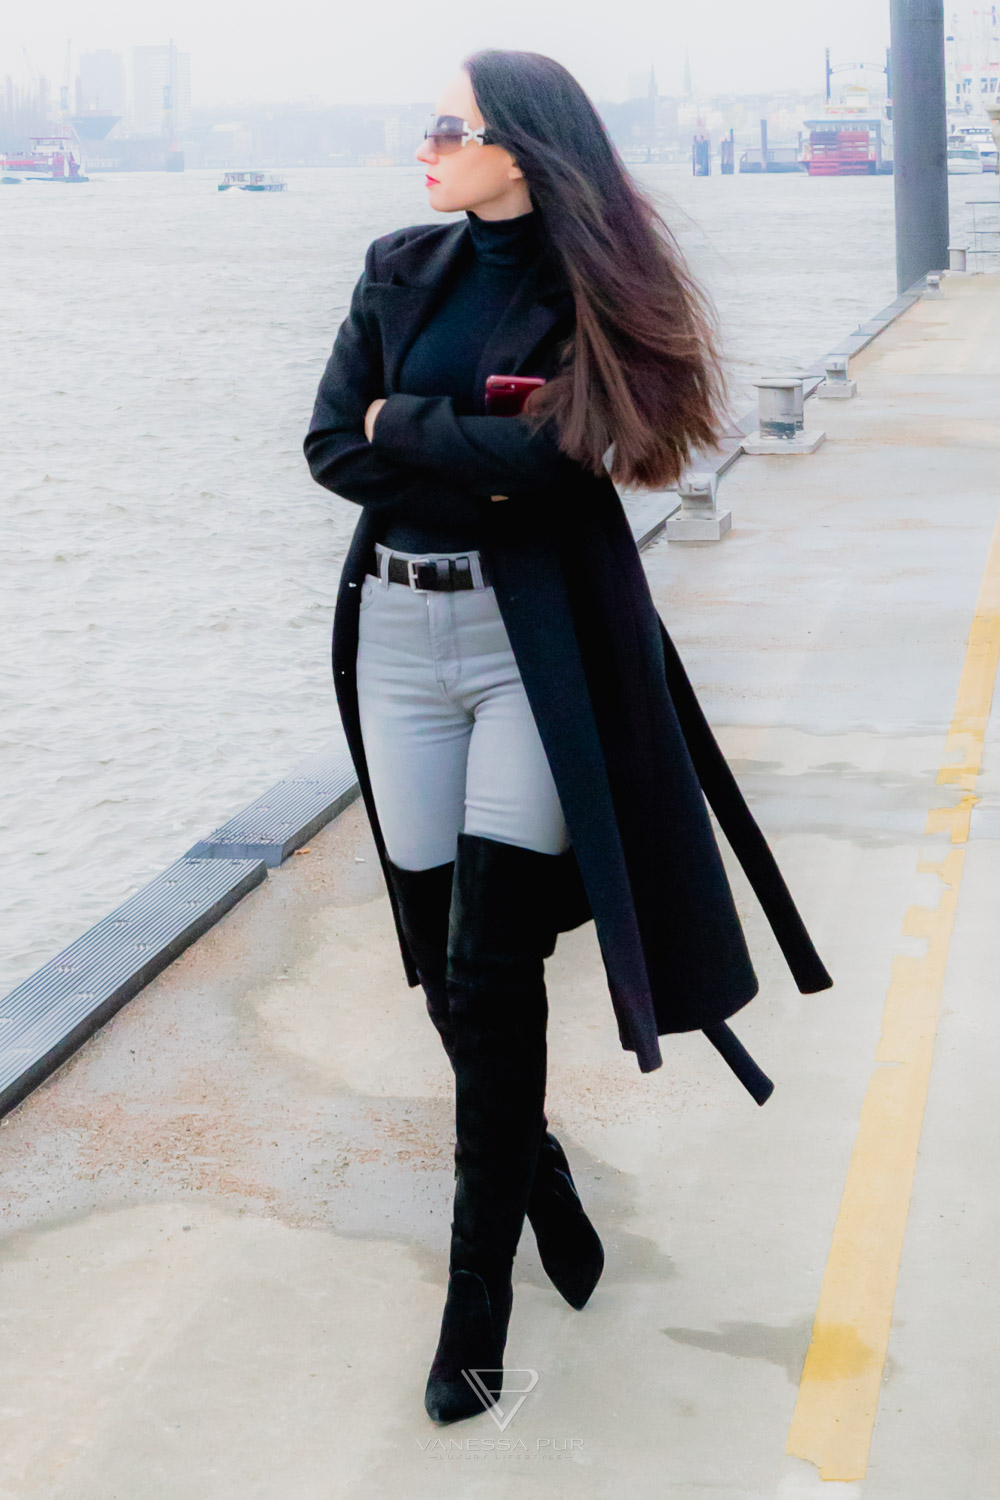 Fashion blog VanessaPur - Hamburg - Elbphilharmonie - Overknee boots - HugoBoss coat - Mustang jeans - Wolford body - Harbour jetty - Best Snapchat Profiles - Top 10 Fashion Blogger Accounts for German Snaps from Influencers - Luxury Fashion and Lifestyle Magazine - Styling Tips Vanessa Pur Fashion Blogger